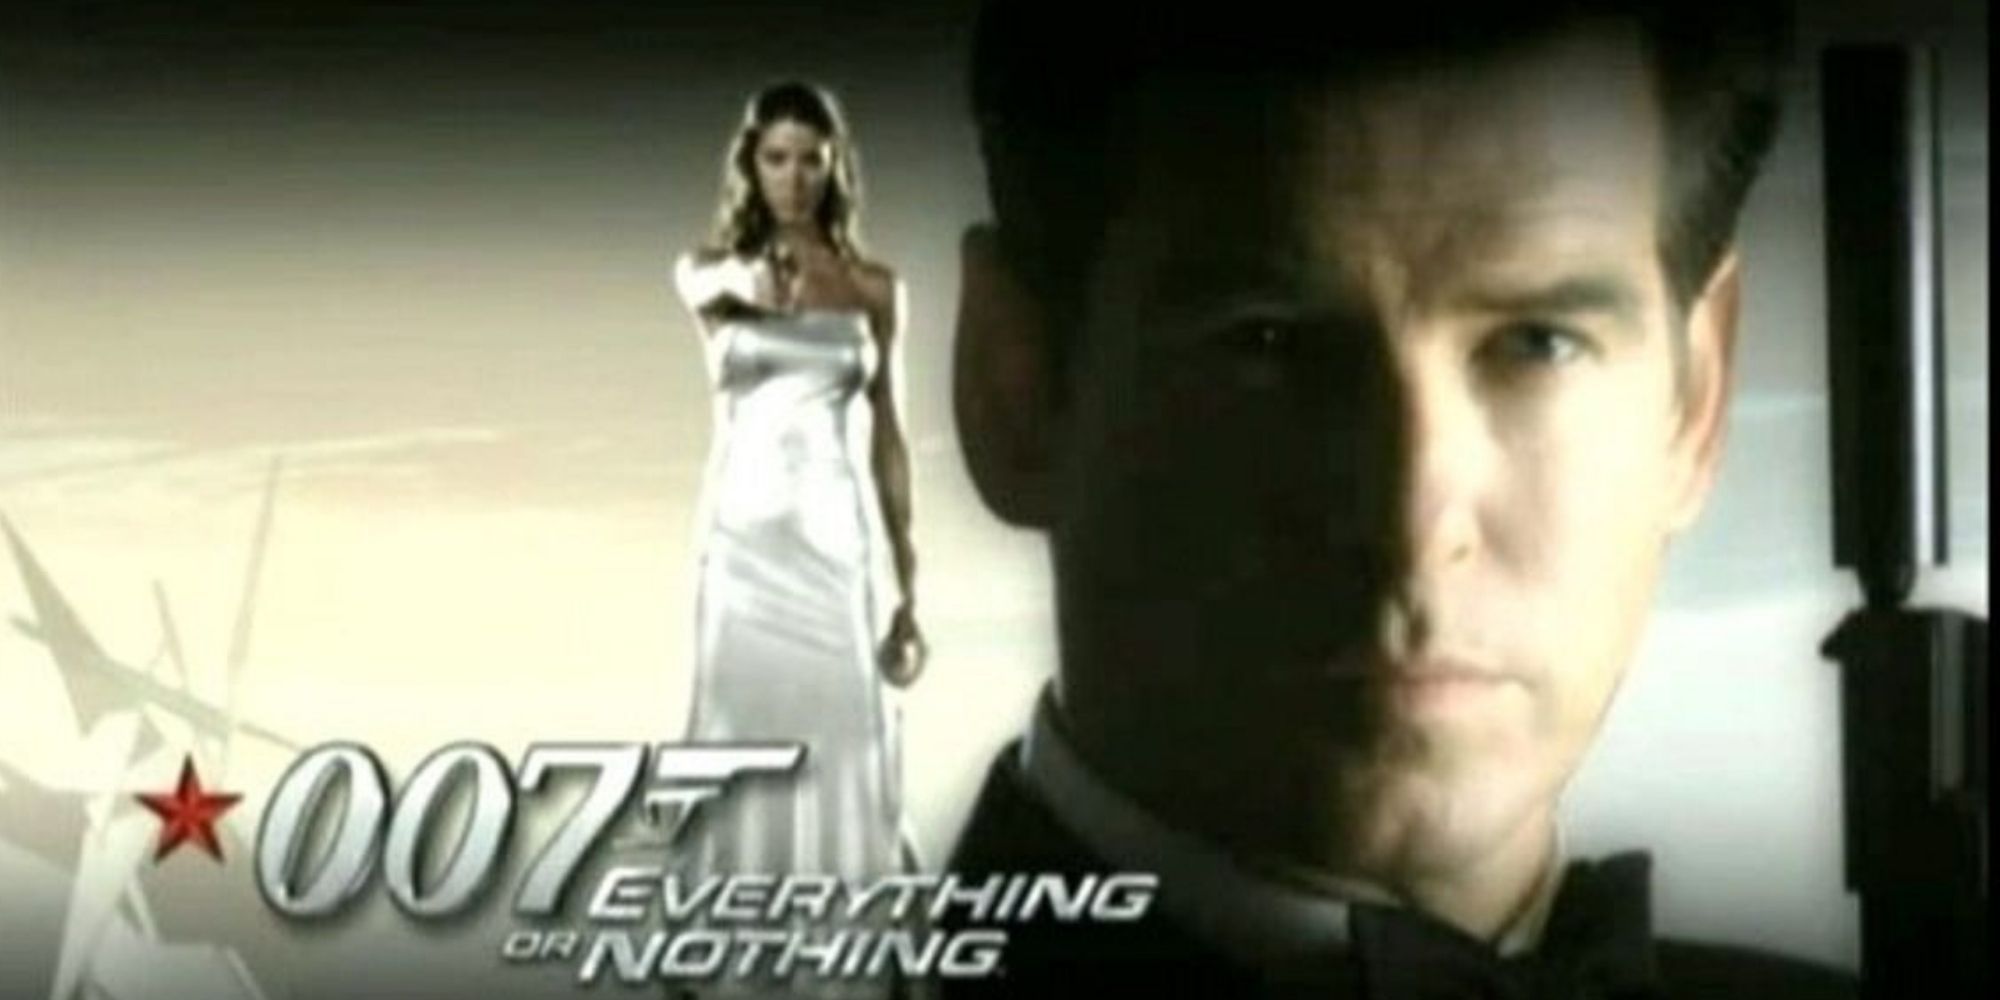 everything or nothing opening credit sequence